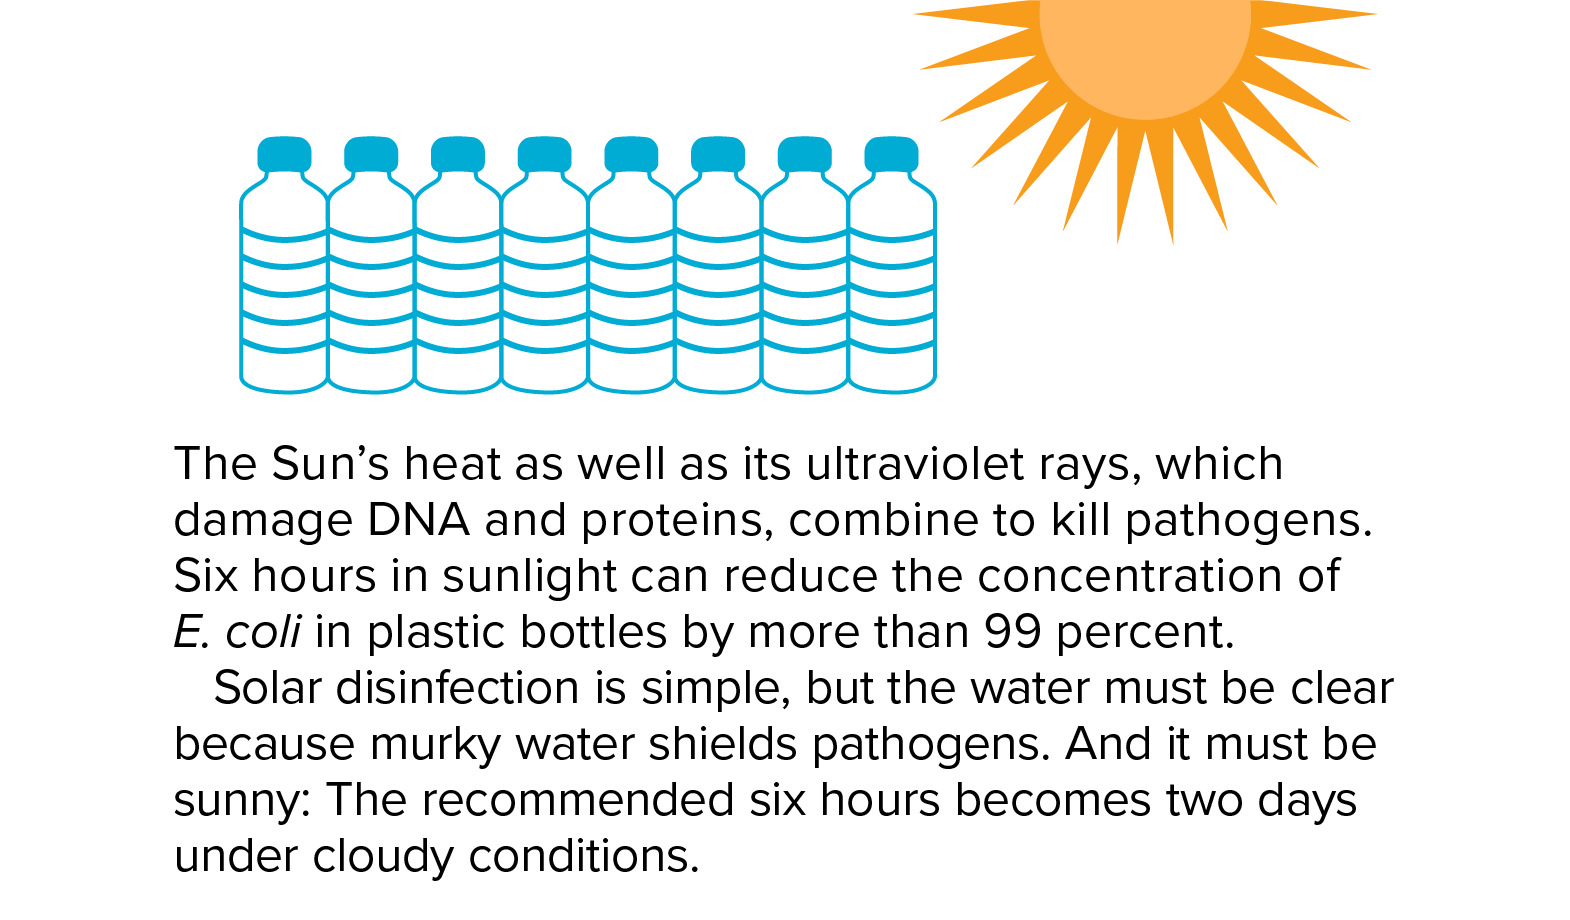 The Sun’s heat as well as its ultraviolet rays, which damage DNA and proteins, combine to kill pathogens. Six hours in sunlight can reduce the concentration of E. coli in plastic bottles by more than 99 percent. Solar disinfection is simple, but the water must be clear because murky water shields pathogens. And it must be sunny: The recommended six hours becomes two days under cloudy conditions.